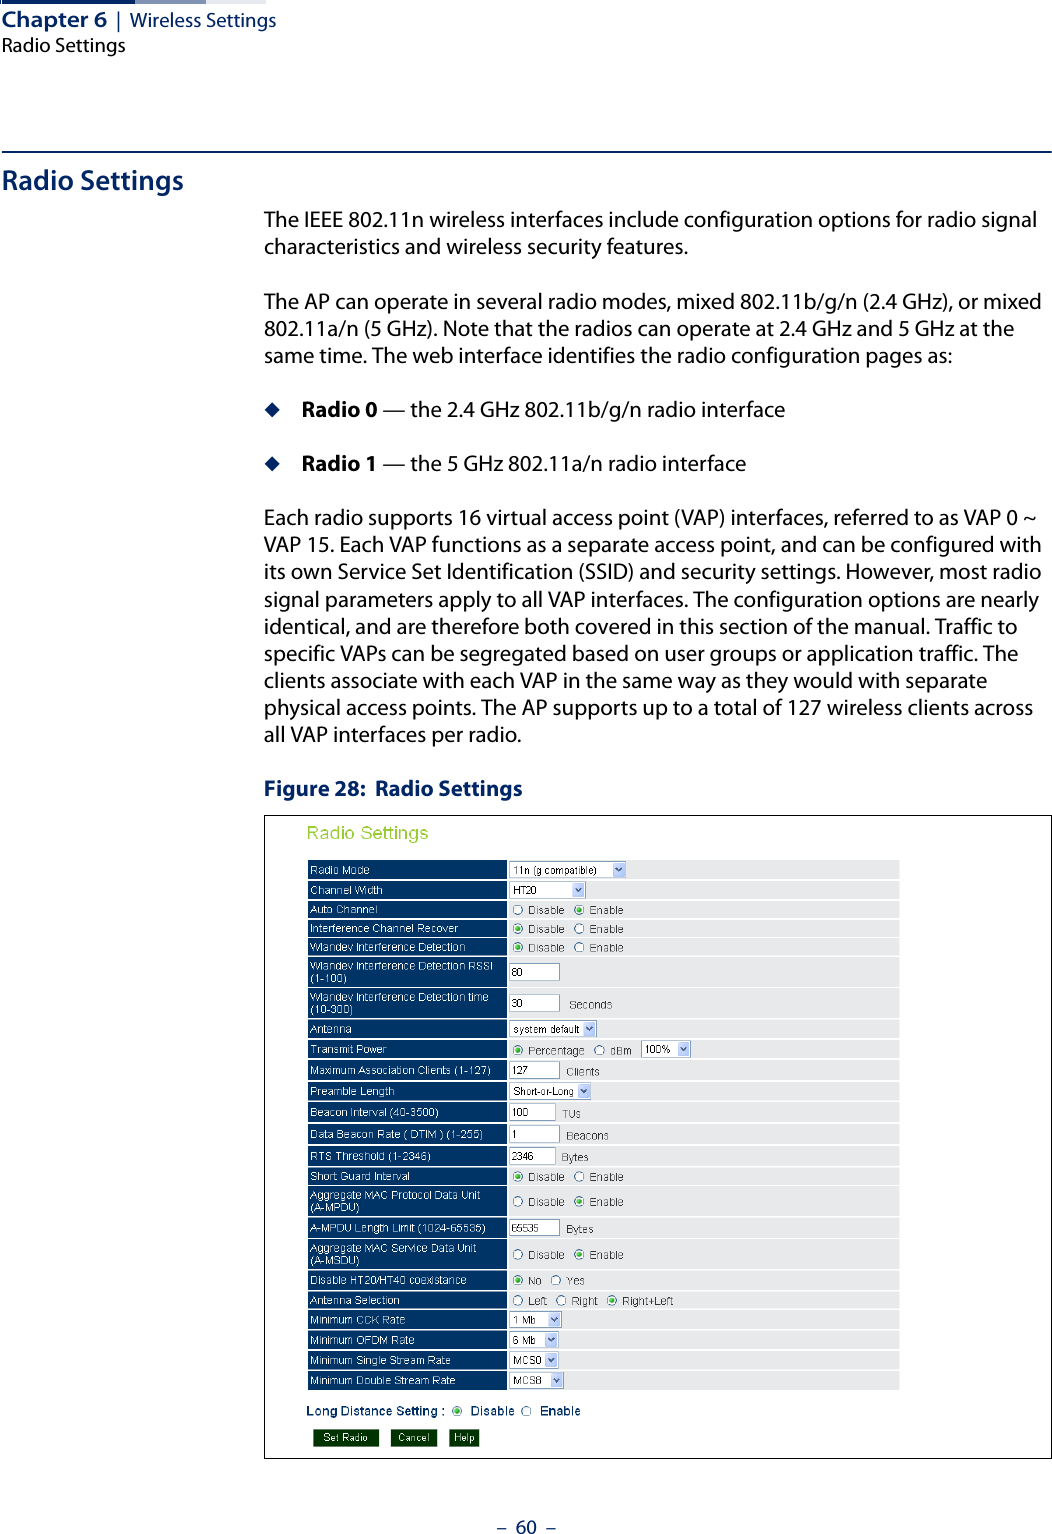 Chapter 6  |  Wireless SettingsRadio Settings–  60  –Radio SettingsThe IEEE 802.11n wireless interfaces include configuration options for radio signal characteristics and wireless security features.The AP can operate in several radio modes, mixed 802.11b/g/n (2.4 GHz), or mixed 802.11a/n (5 GHz). Note that the radios can operate at 2.4 GHz and 5 GHz at the same time. The web interface identifies the radio configuration pages as:◆Radio 0 — the 2.4 GHz 802.11b/g/n radio interface◆Radio 1 — the 5 GHz 802.11a/n radio interfaceEach radio supports 16 virtual access point (VAP) interfaces, referred to as VAP 0 ~ VAP 15. Each VAP functions as a separate access point, and can be configured with its own Service Set Identification (SSID) and security settings. However, most radio signal parameters apply to all VAP interfaces. The configuration options are nearly identical, and are therefore both covered in this section of the manual. Traffic to specific VAPs can be segregated based on user groups or application traffic. The clients associate with each VAP in the same way as they would with separate physical access points. The AP supports up to a total of 127 wireless clients across all VAP interfaces per radio. Figure 28:  Radio Settings